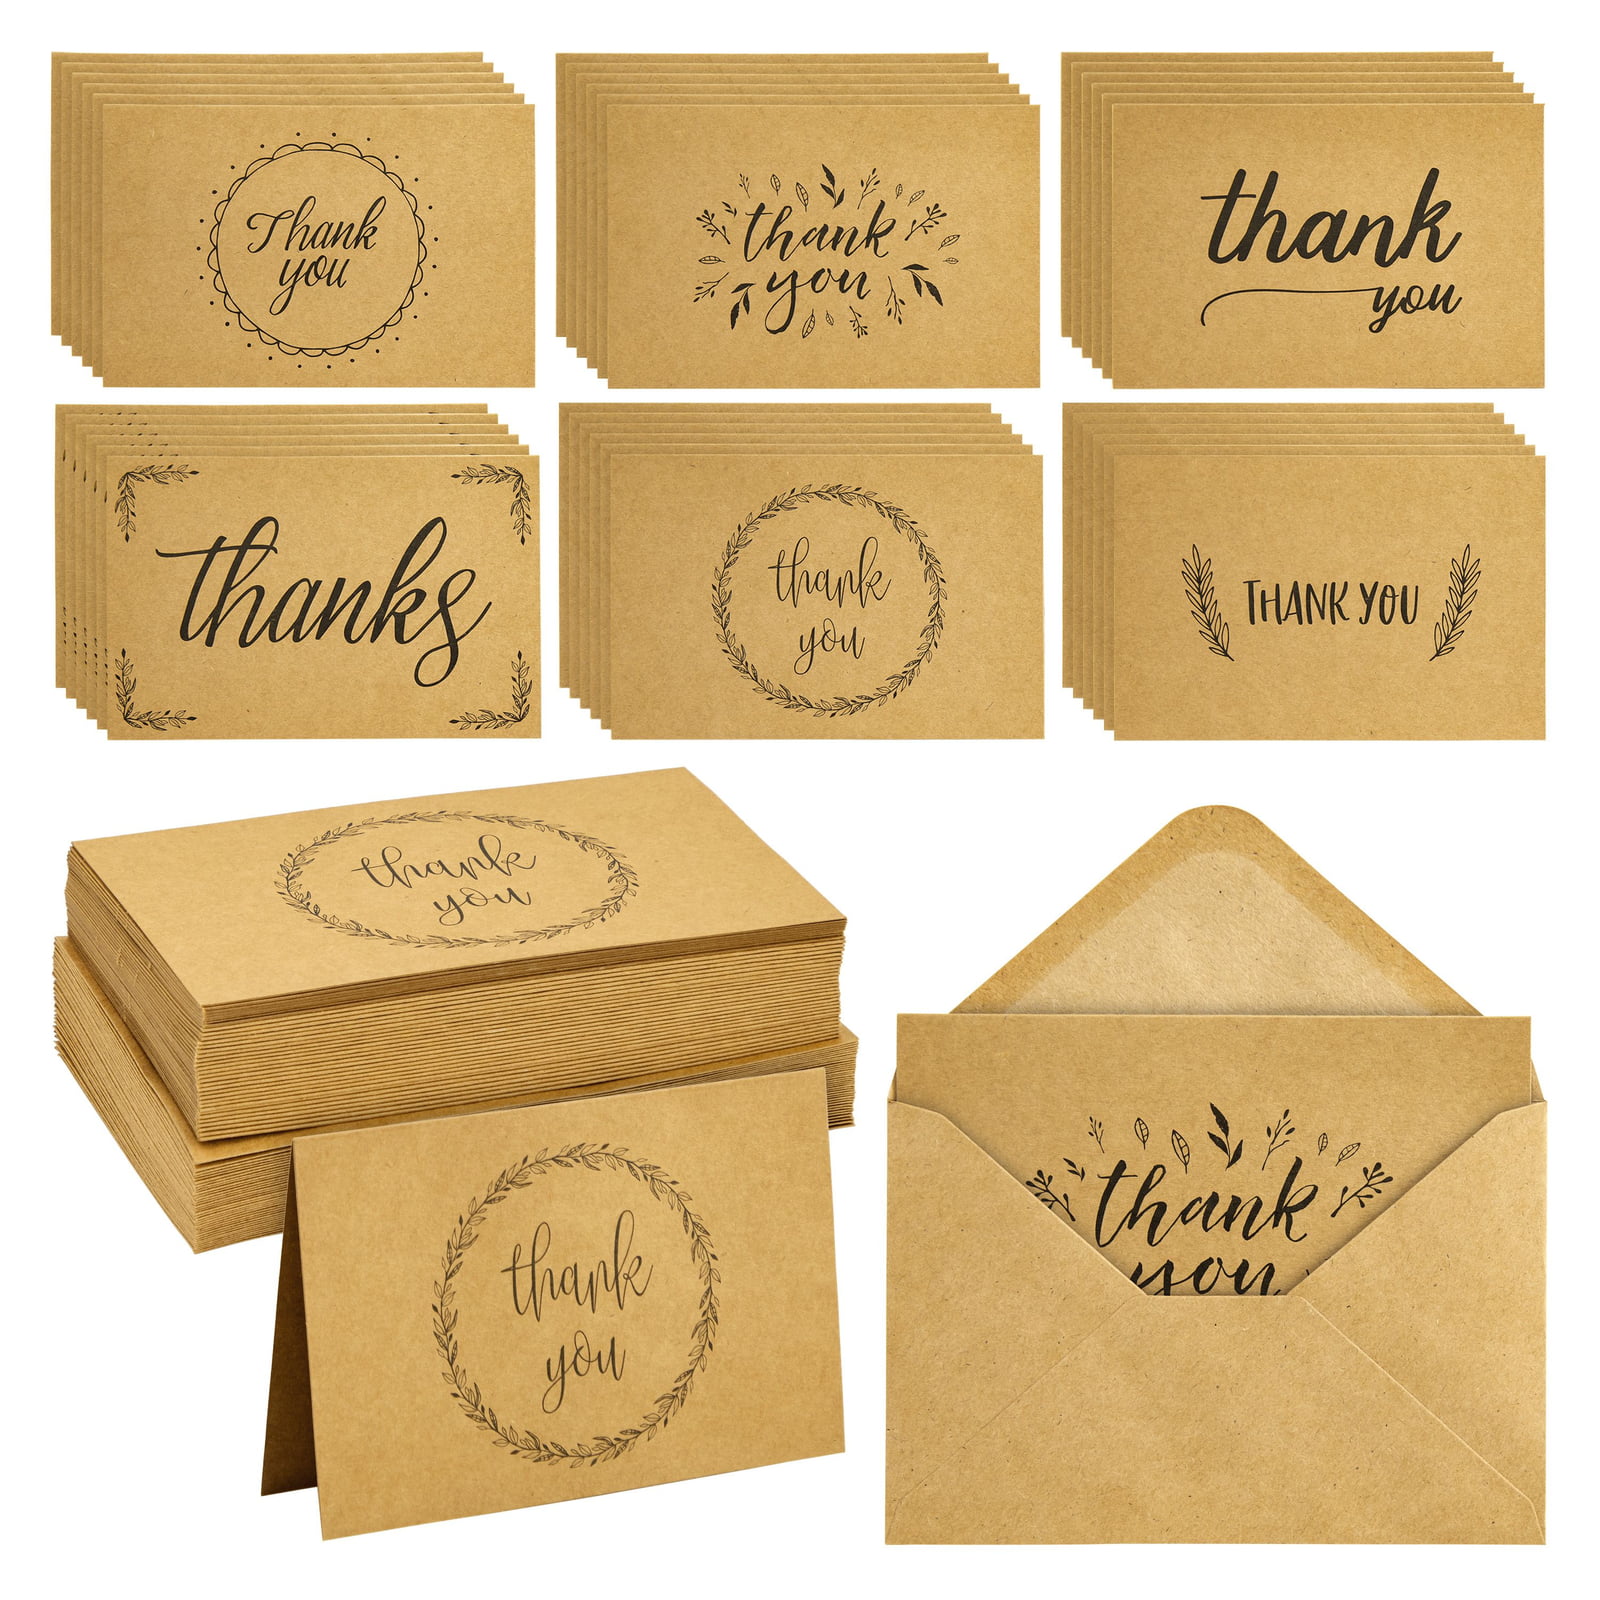 50 x BROWN KRAFT PILLOW BOXES FAVOUR PARTY PERSONALISED CUSTOM THANK YOU LABELS 